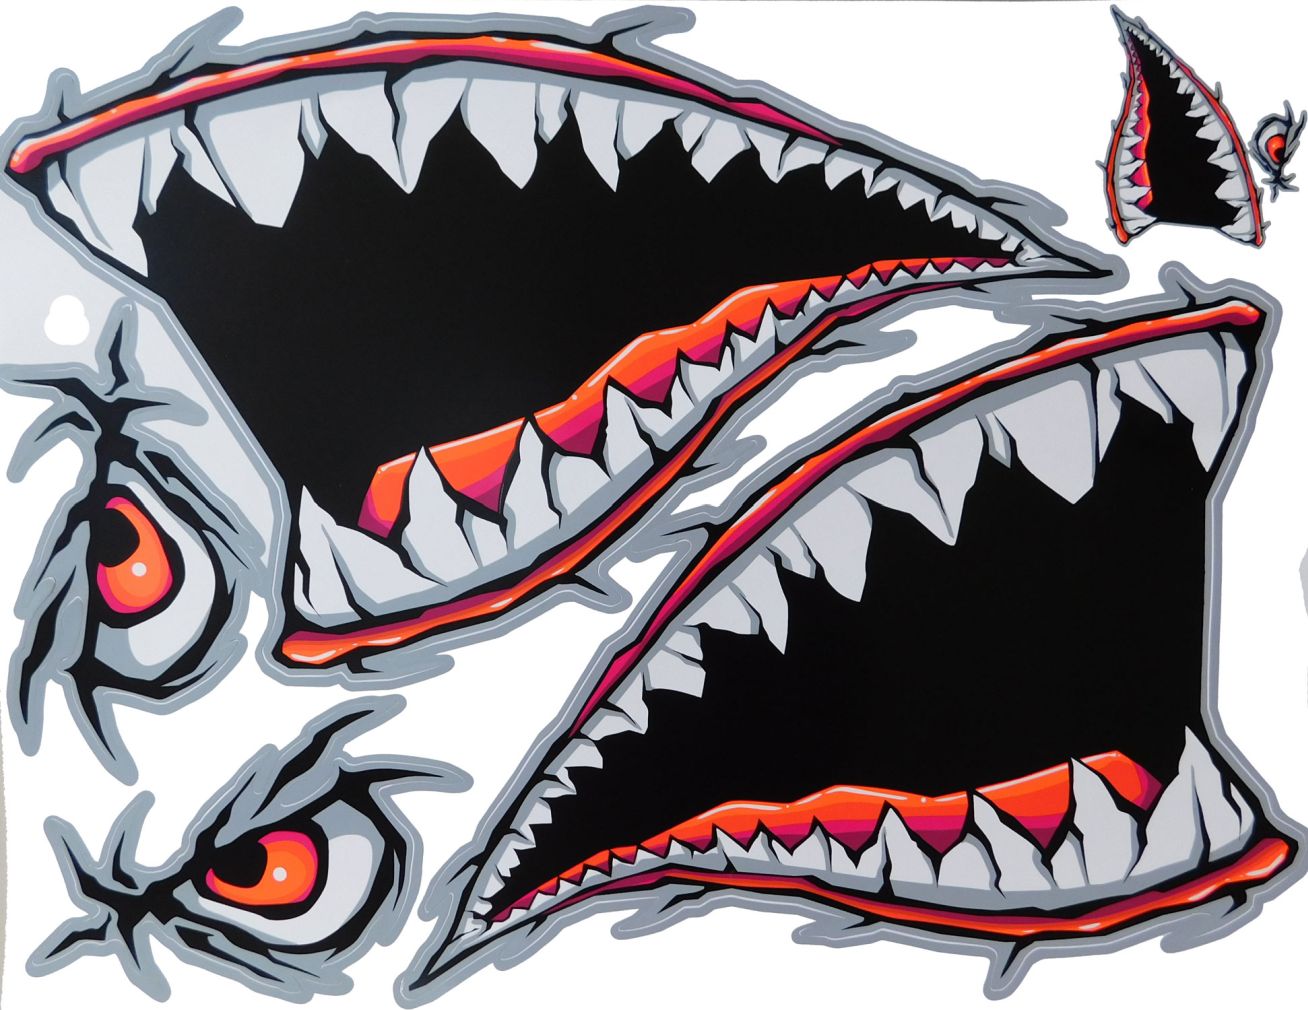 BIG SIZE shark mouth pharynx gullet teeth pink sticker motorcycle scooter skateboard car tuning model building self-adhesive FSB113